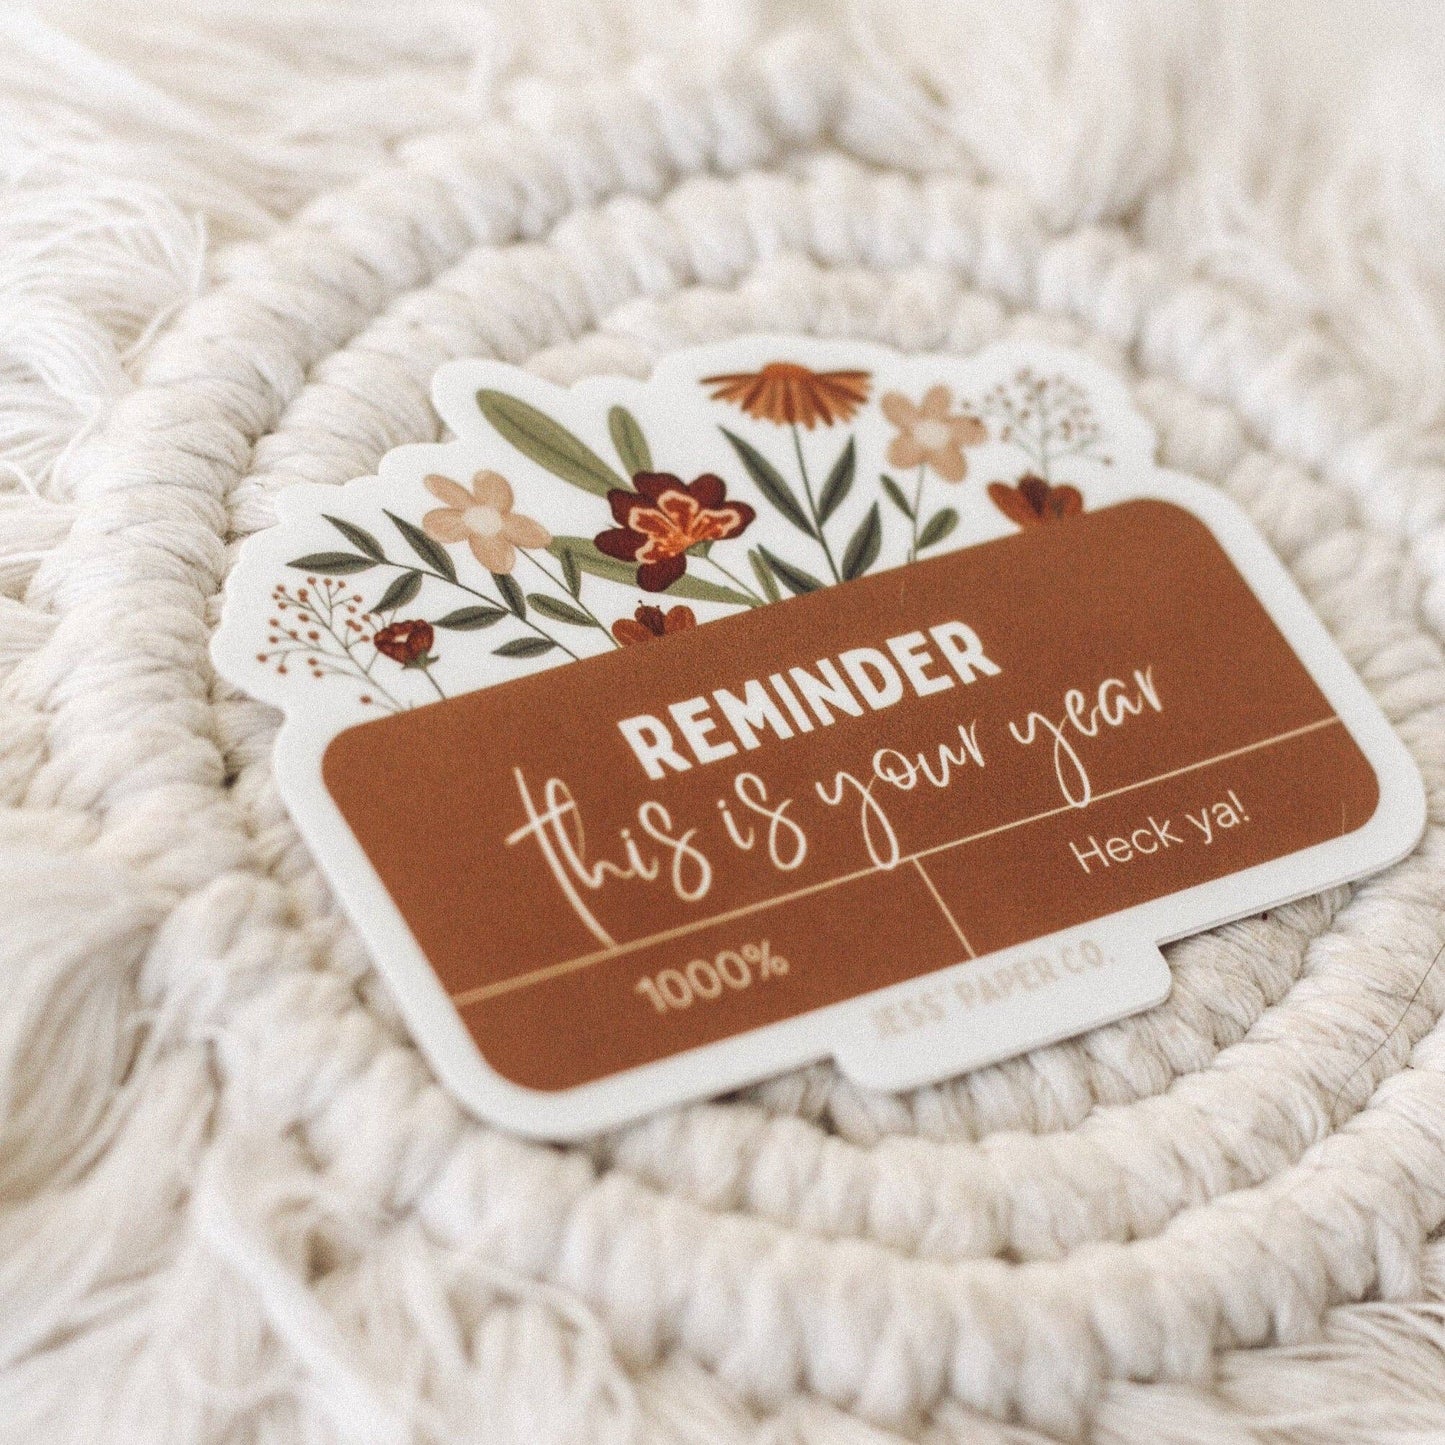 Reminder "this is your year" Sticker Home Goods Jess' Paper Co.   